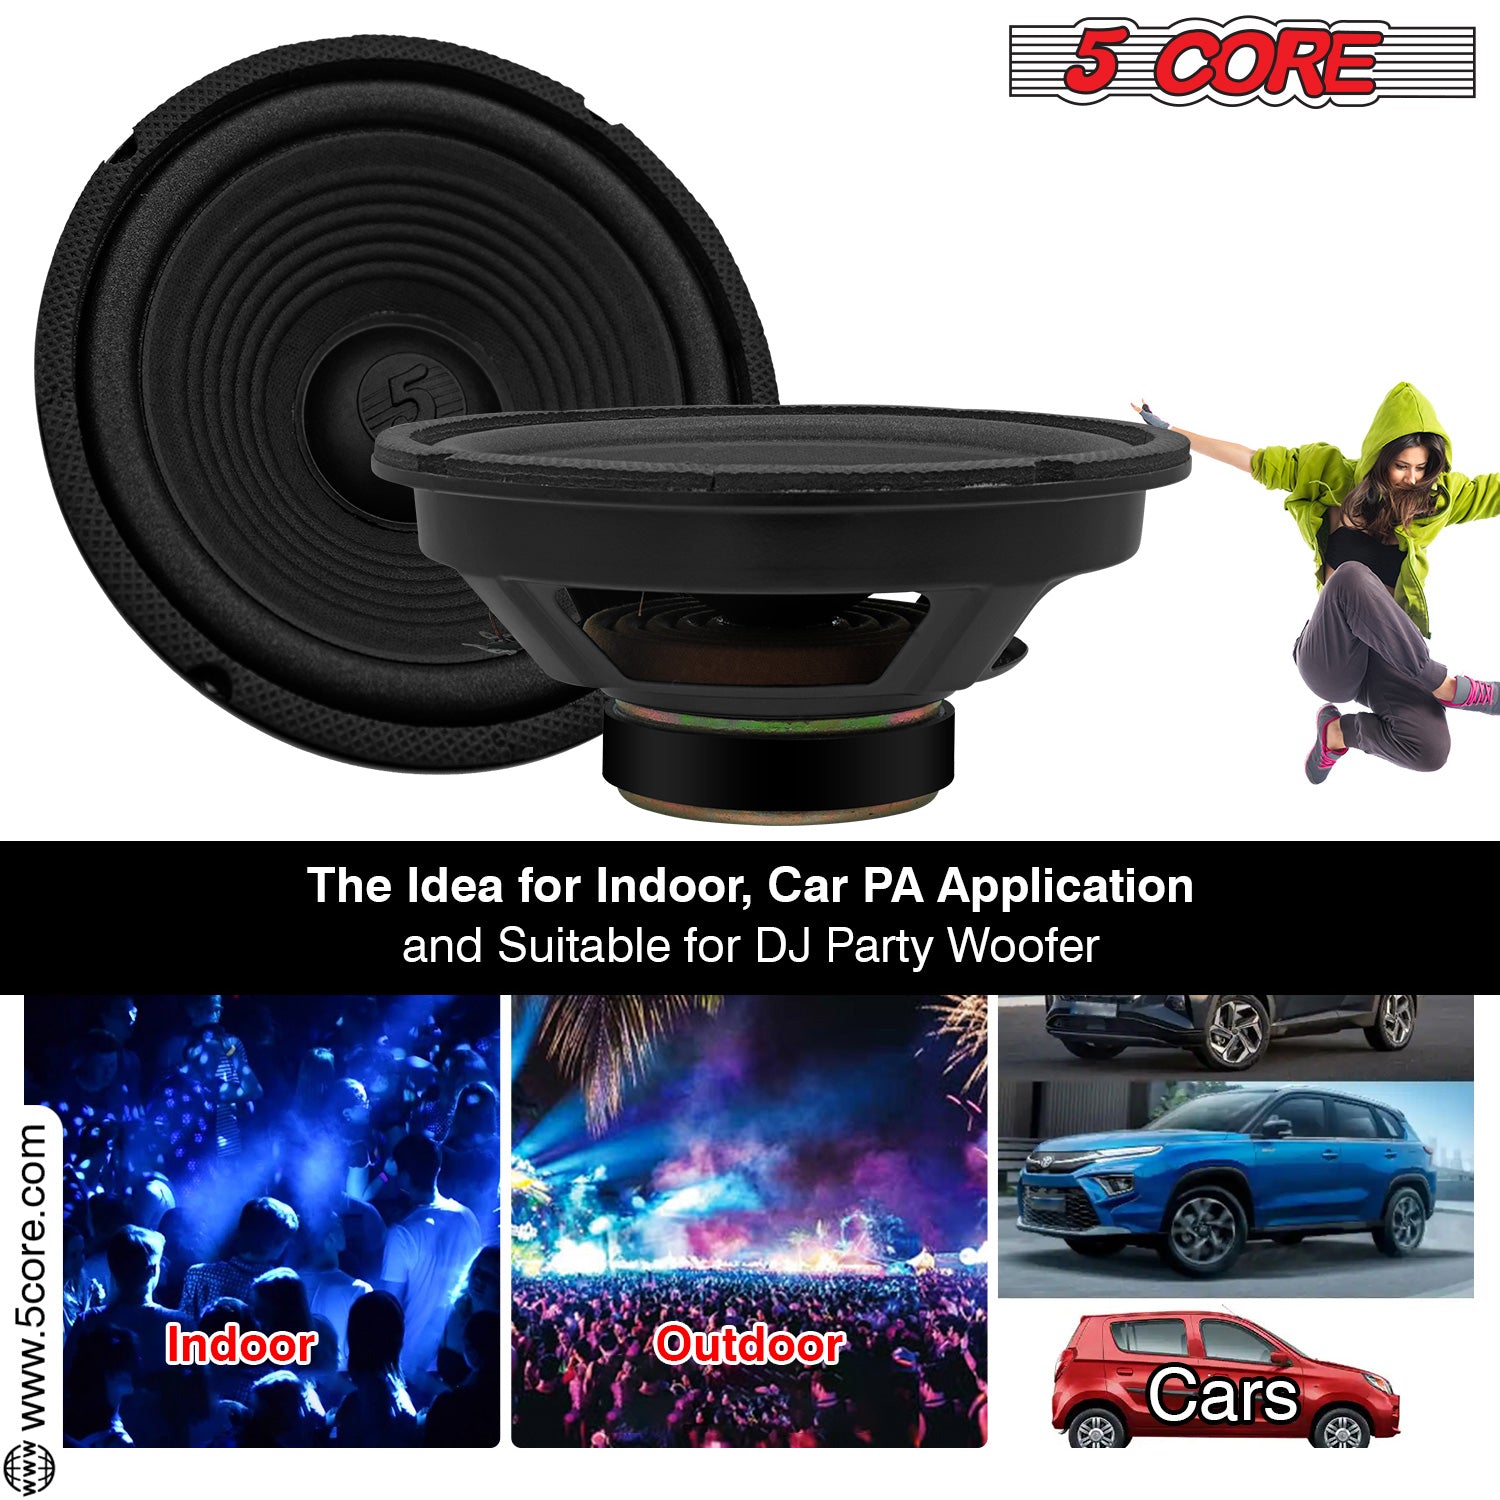 Usage of this 8 Inch Subwoofer